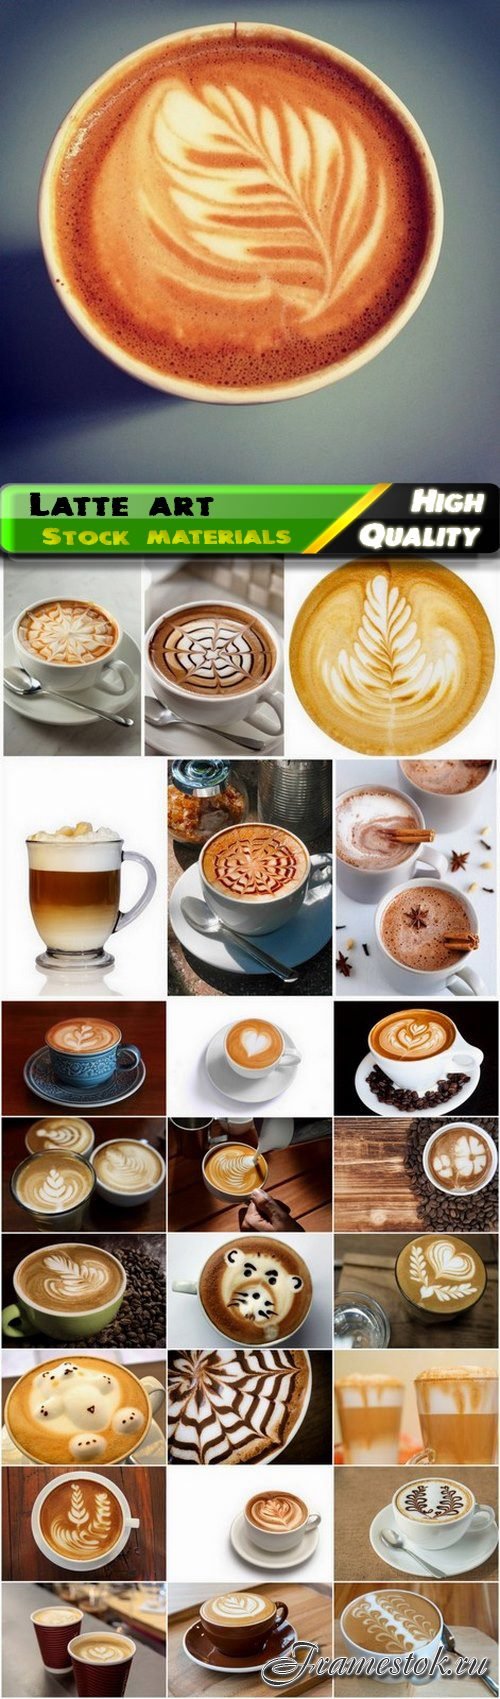 Coffee with milk and latte art - 25 HQ Jpg